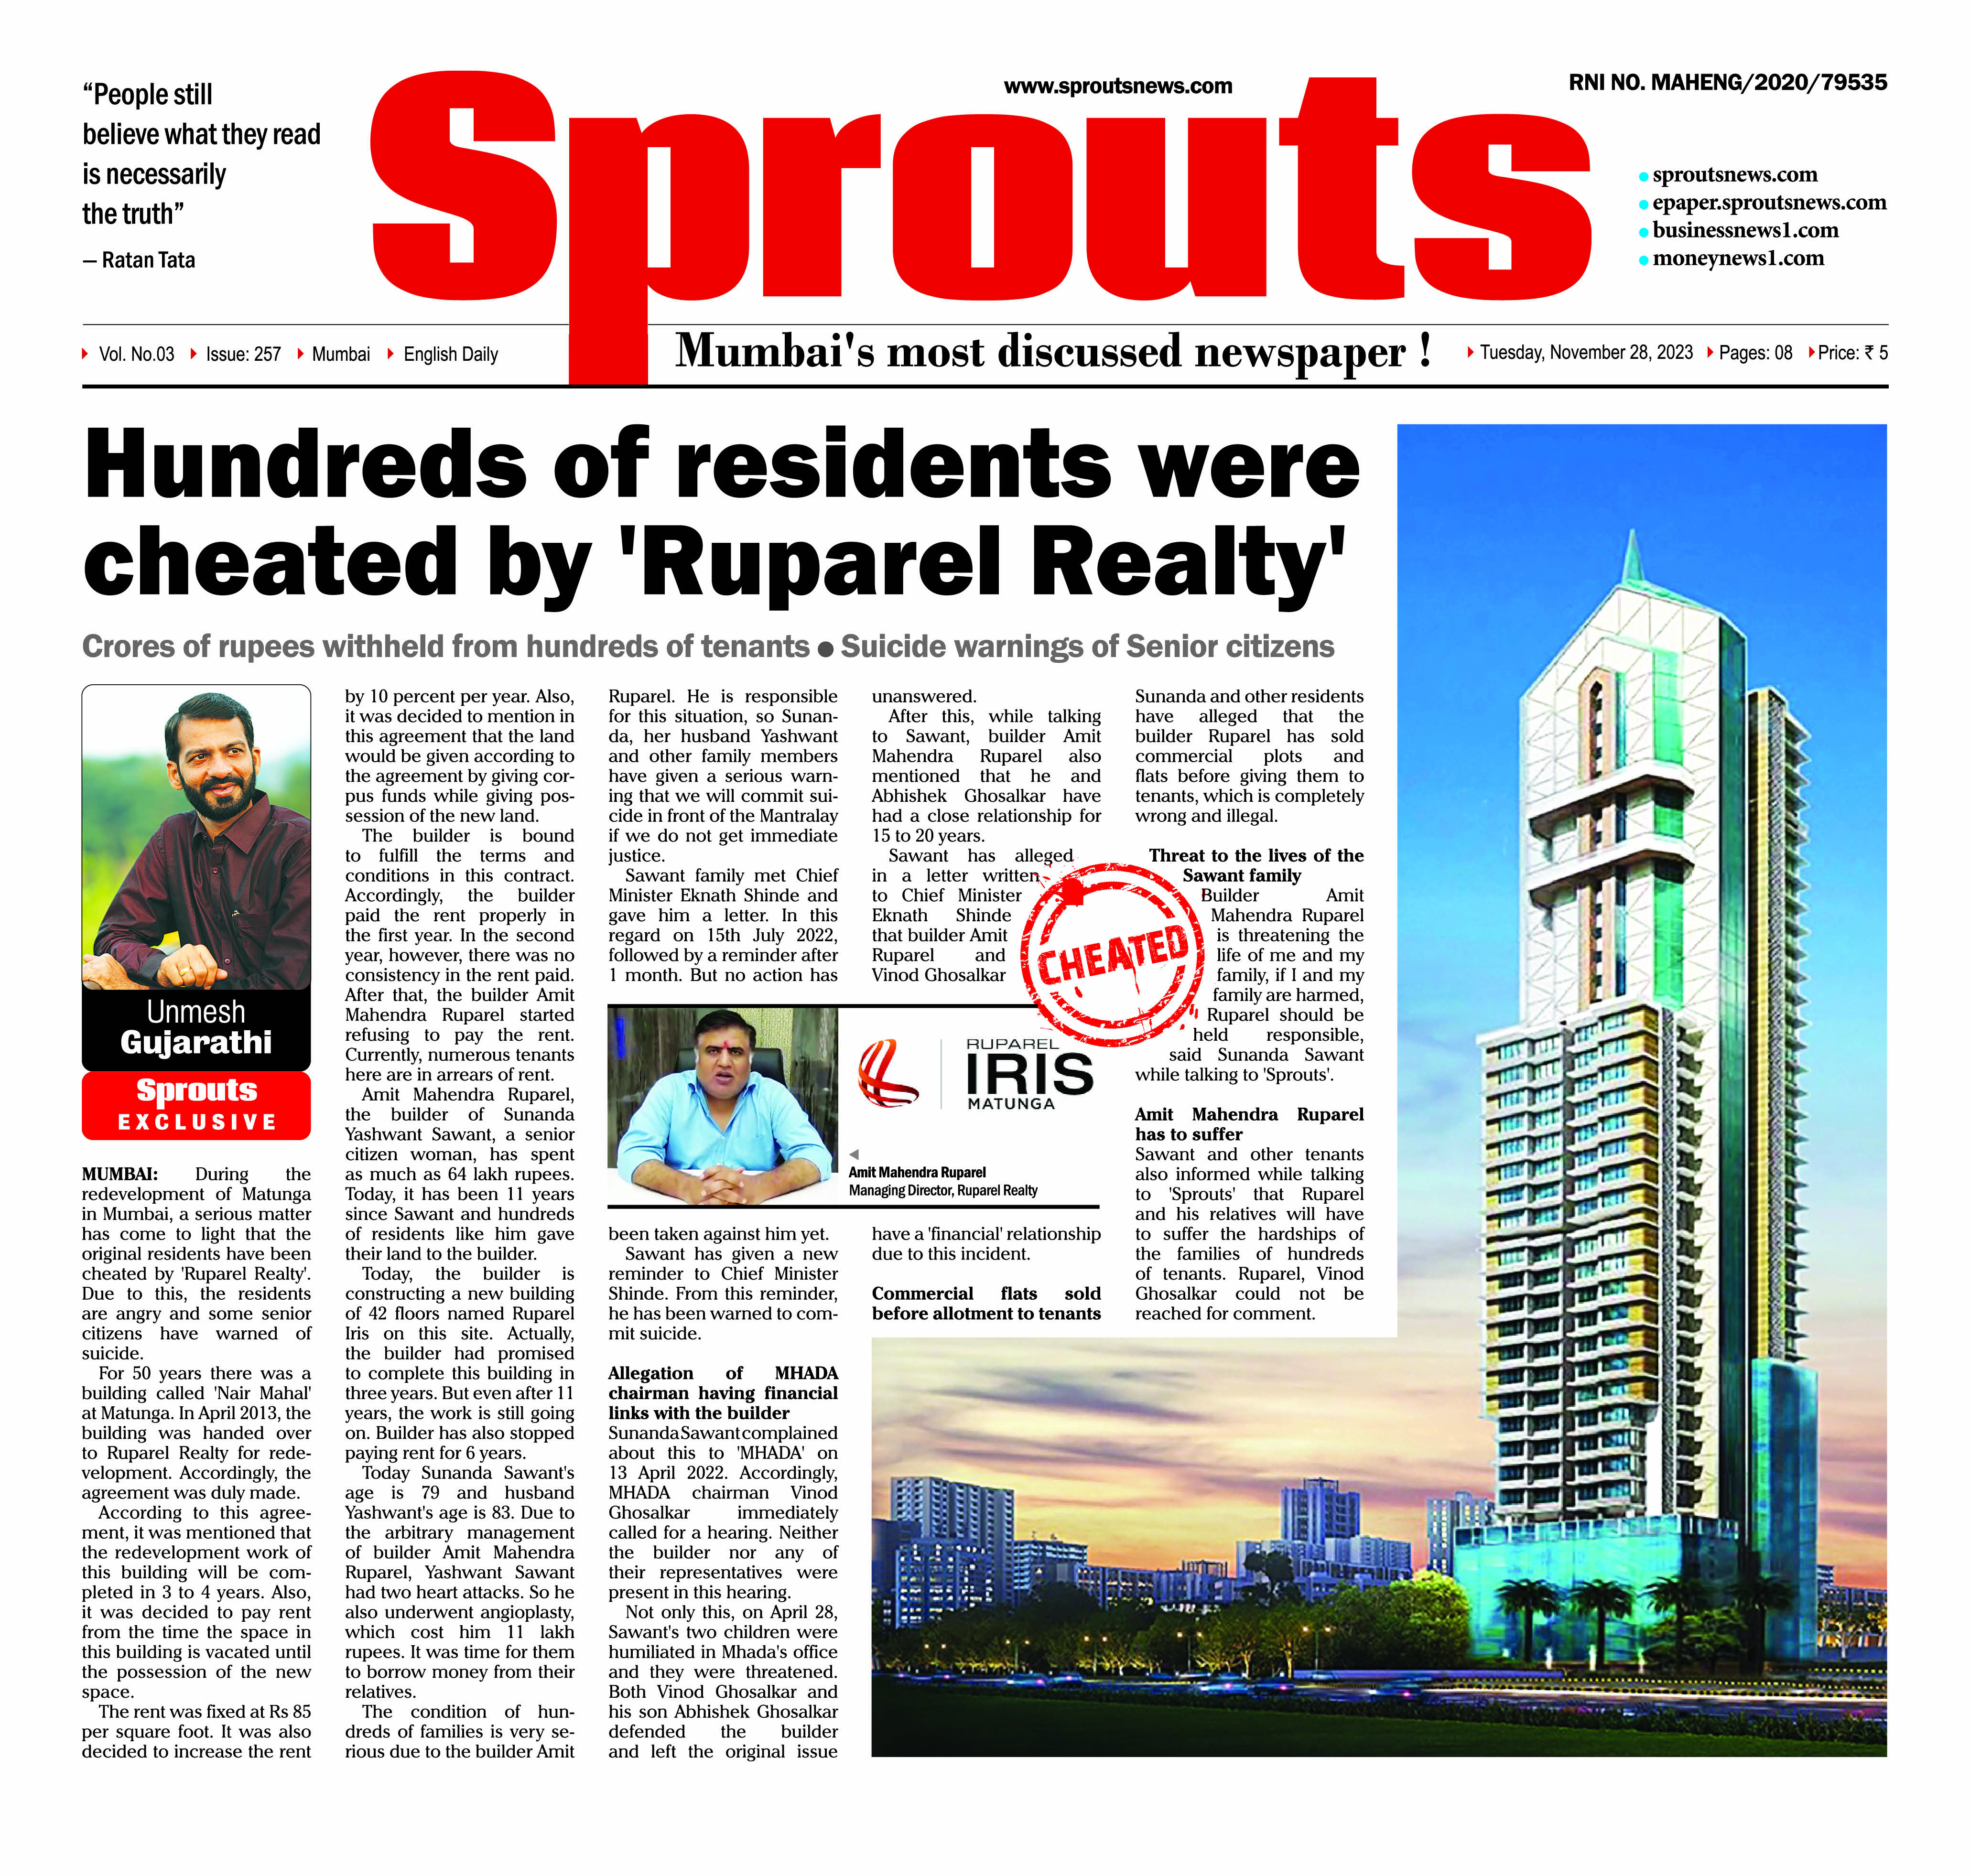 Hundreds of residents were cheated by ‘Ruparel Realty’